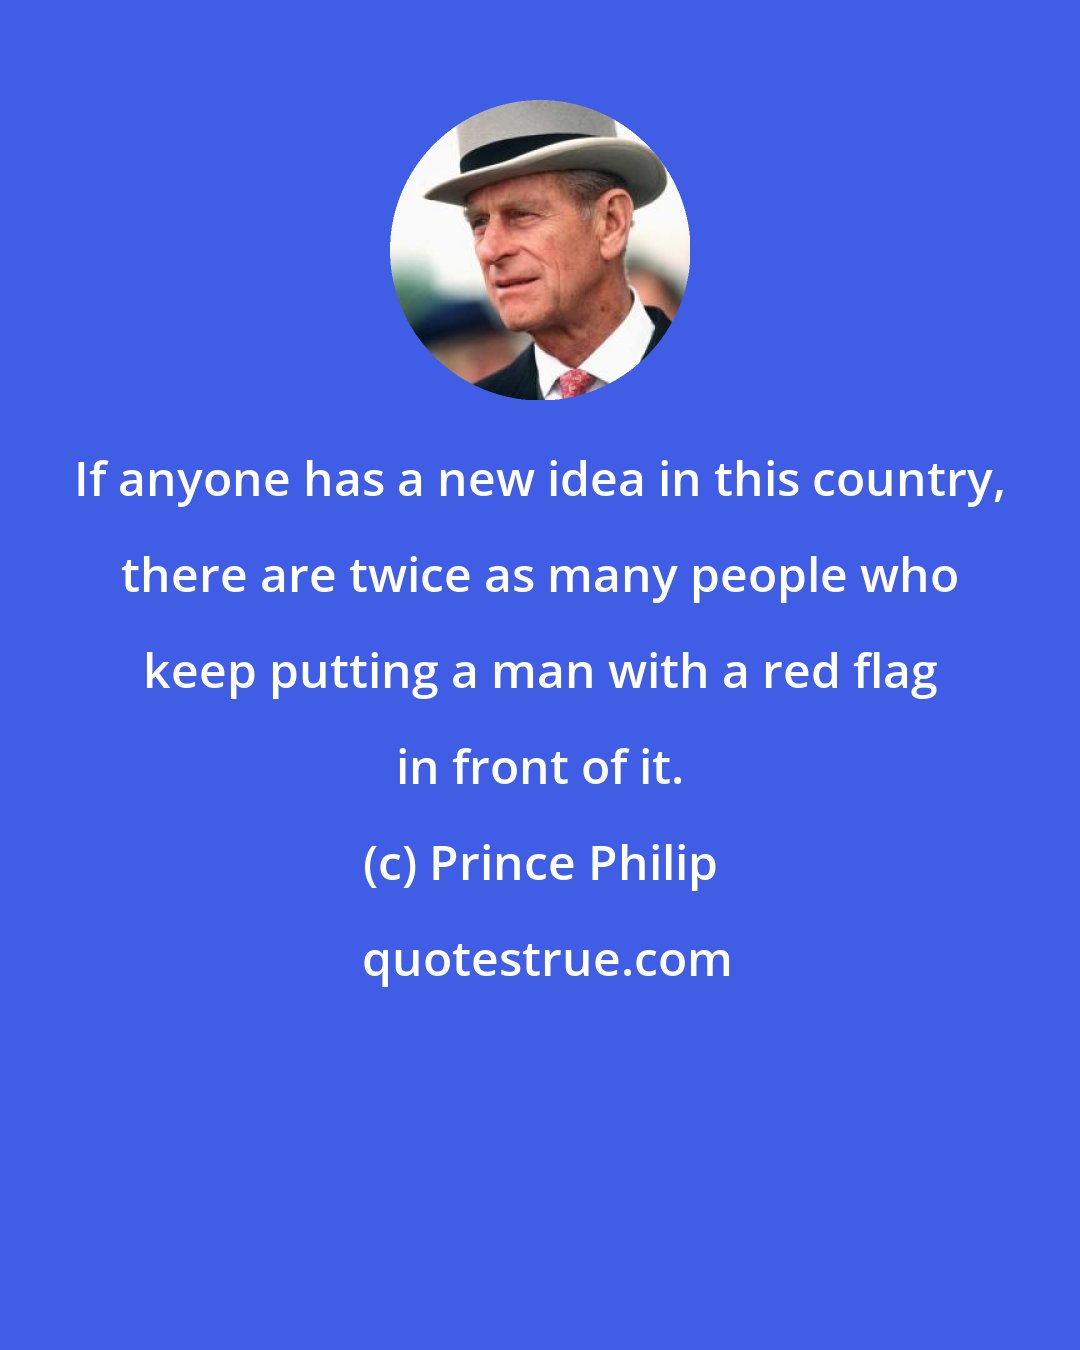 Prince Philip: If anyone has a new idea in this country, there are twice as many people who keep putting a man with a red flag in front of it.